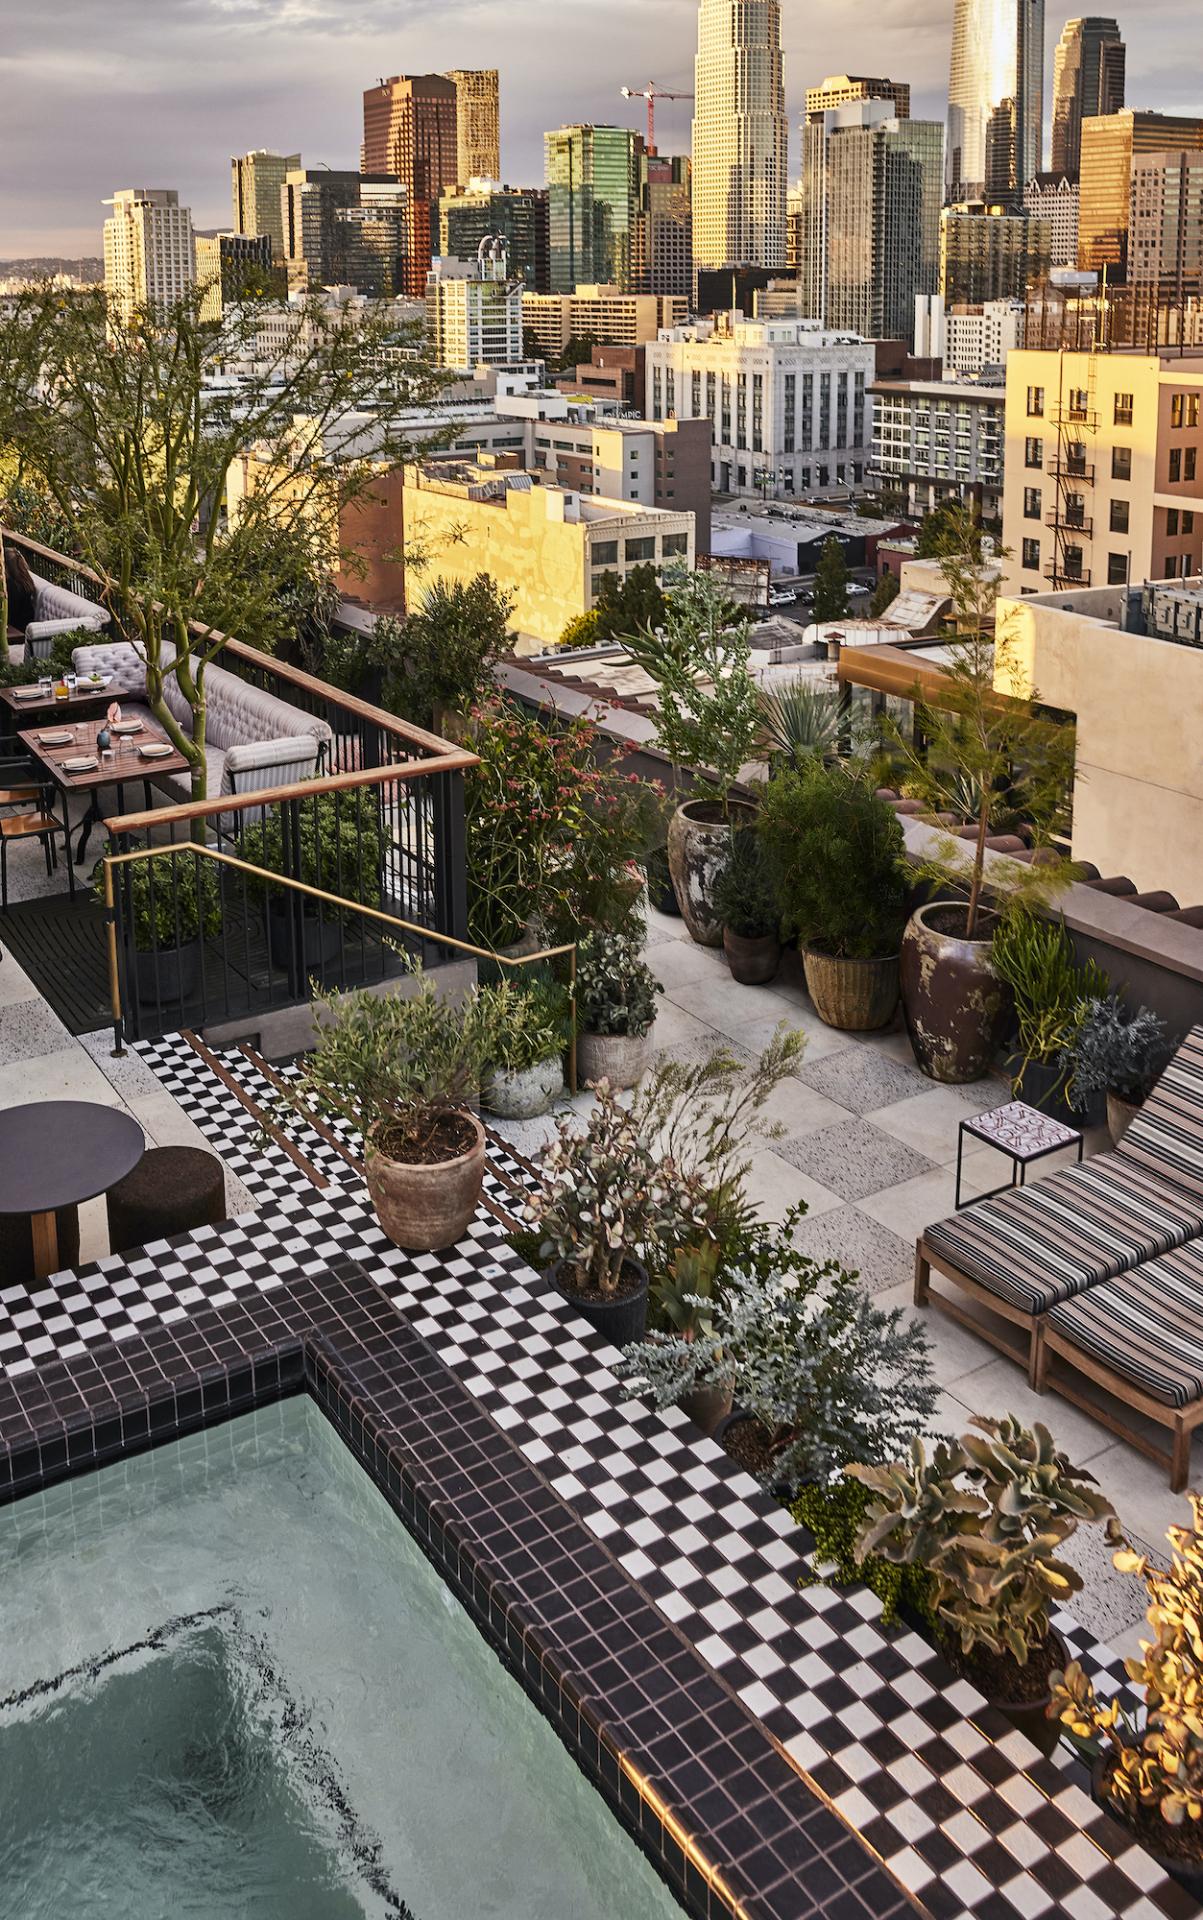 Our Top 10 Hotels by Design: The Downtown L.A. Proper Hotel